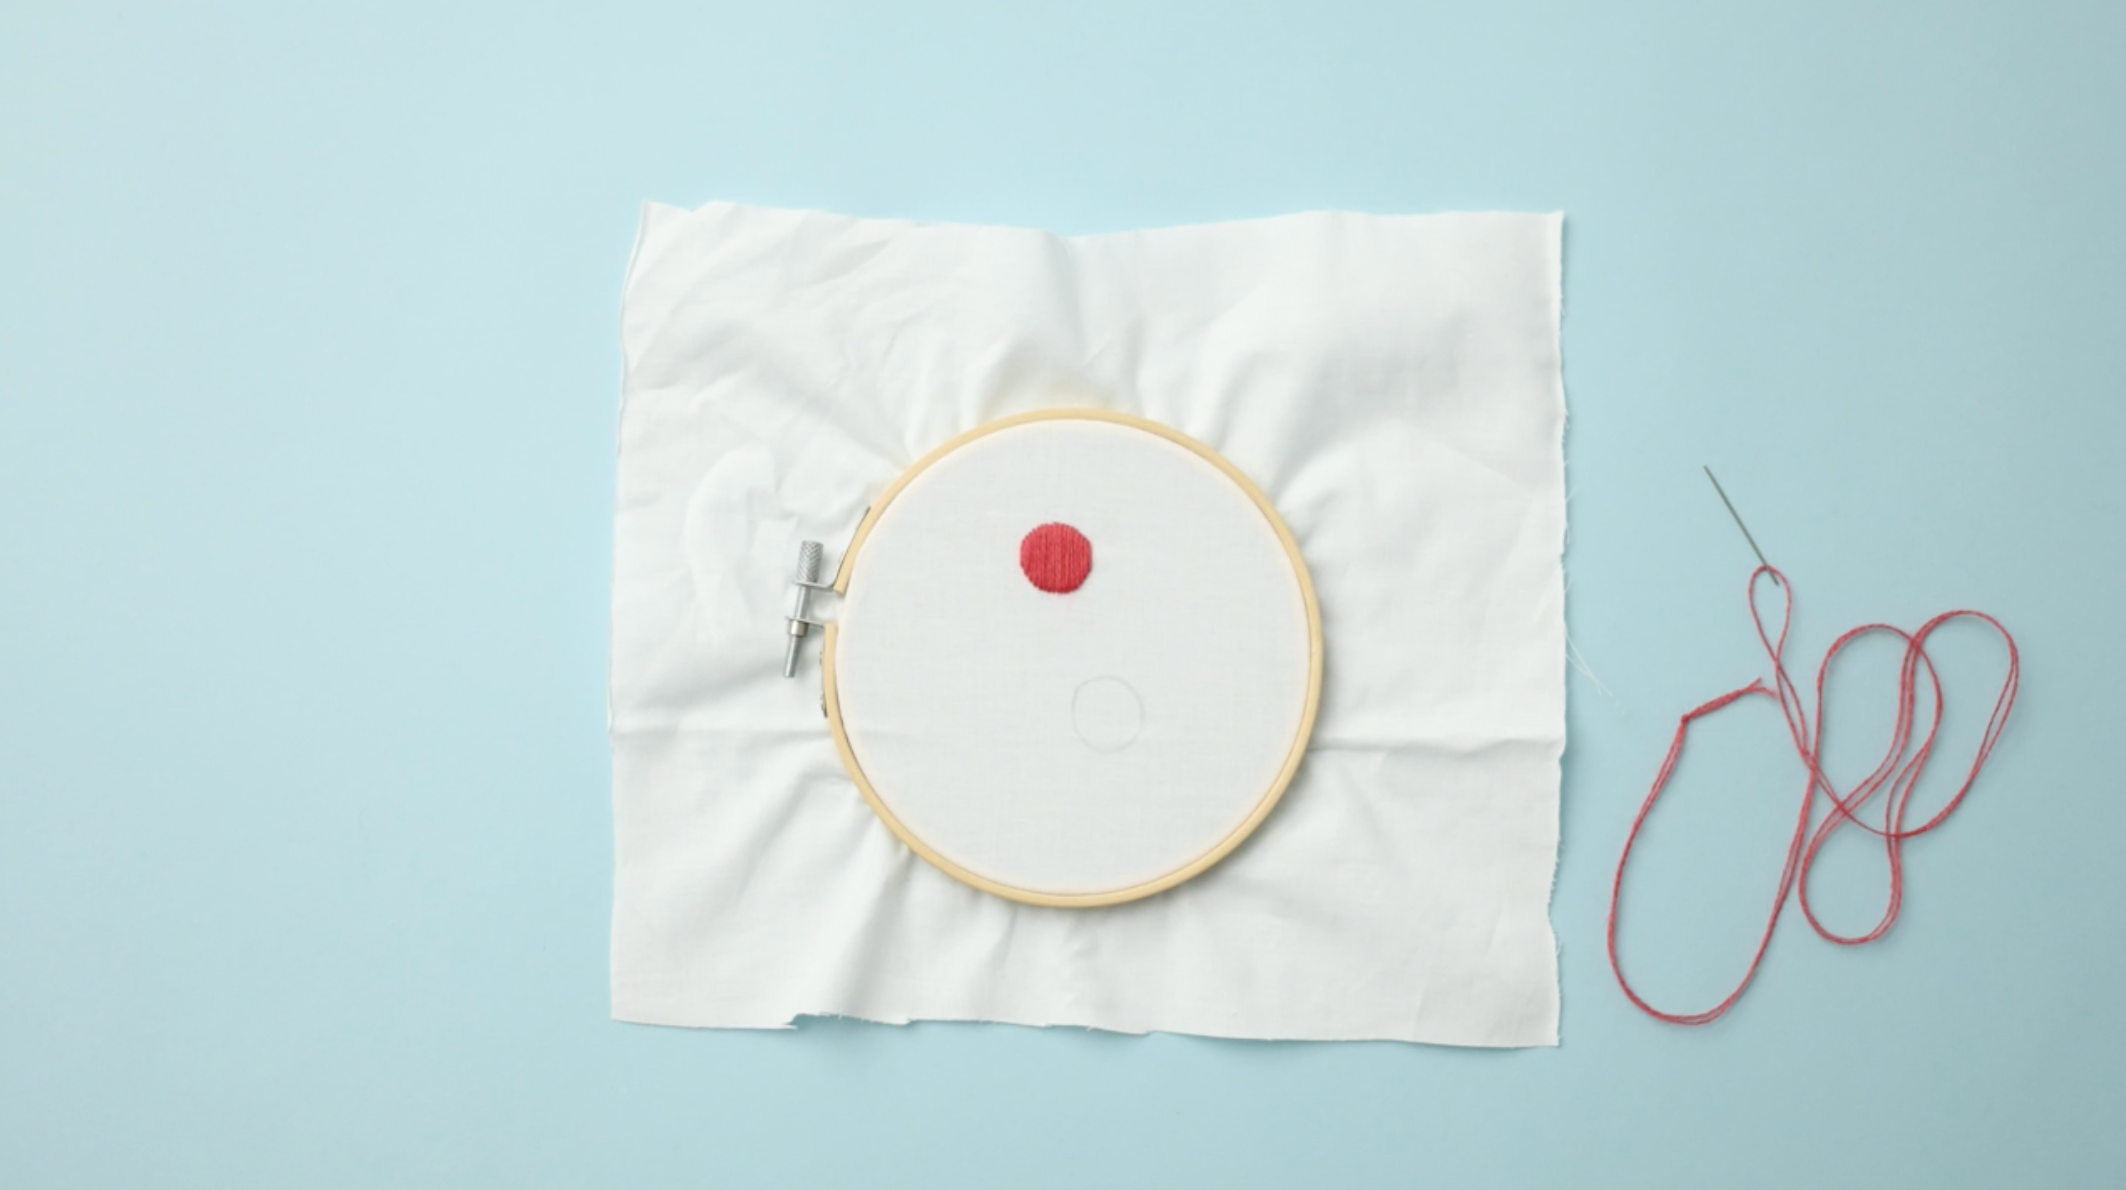 Satin Stitch Tutorial: Step-By-Step Embroidery Instructions